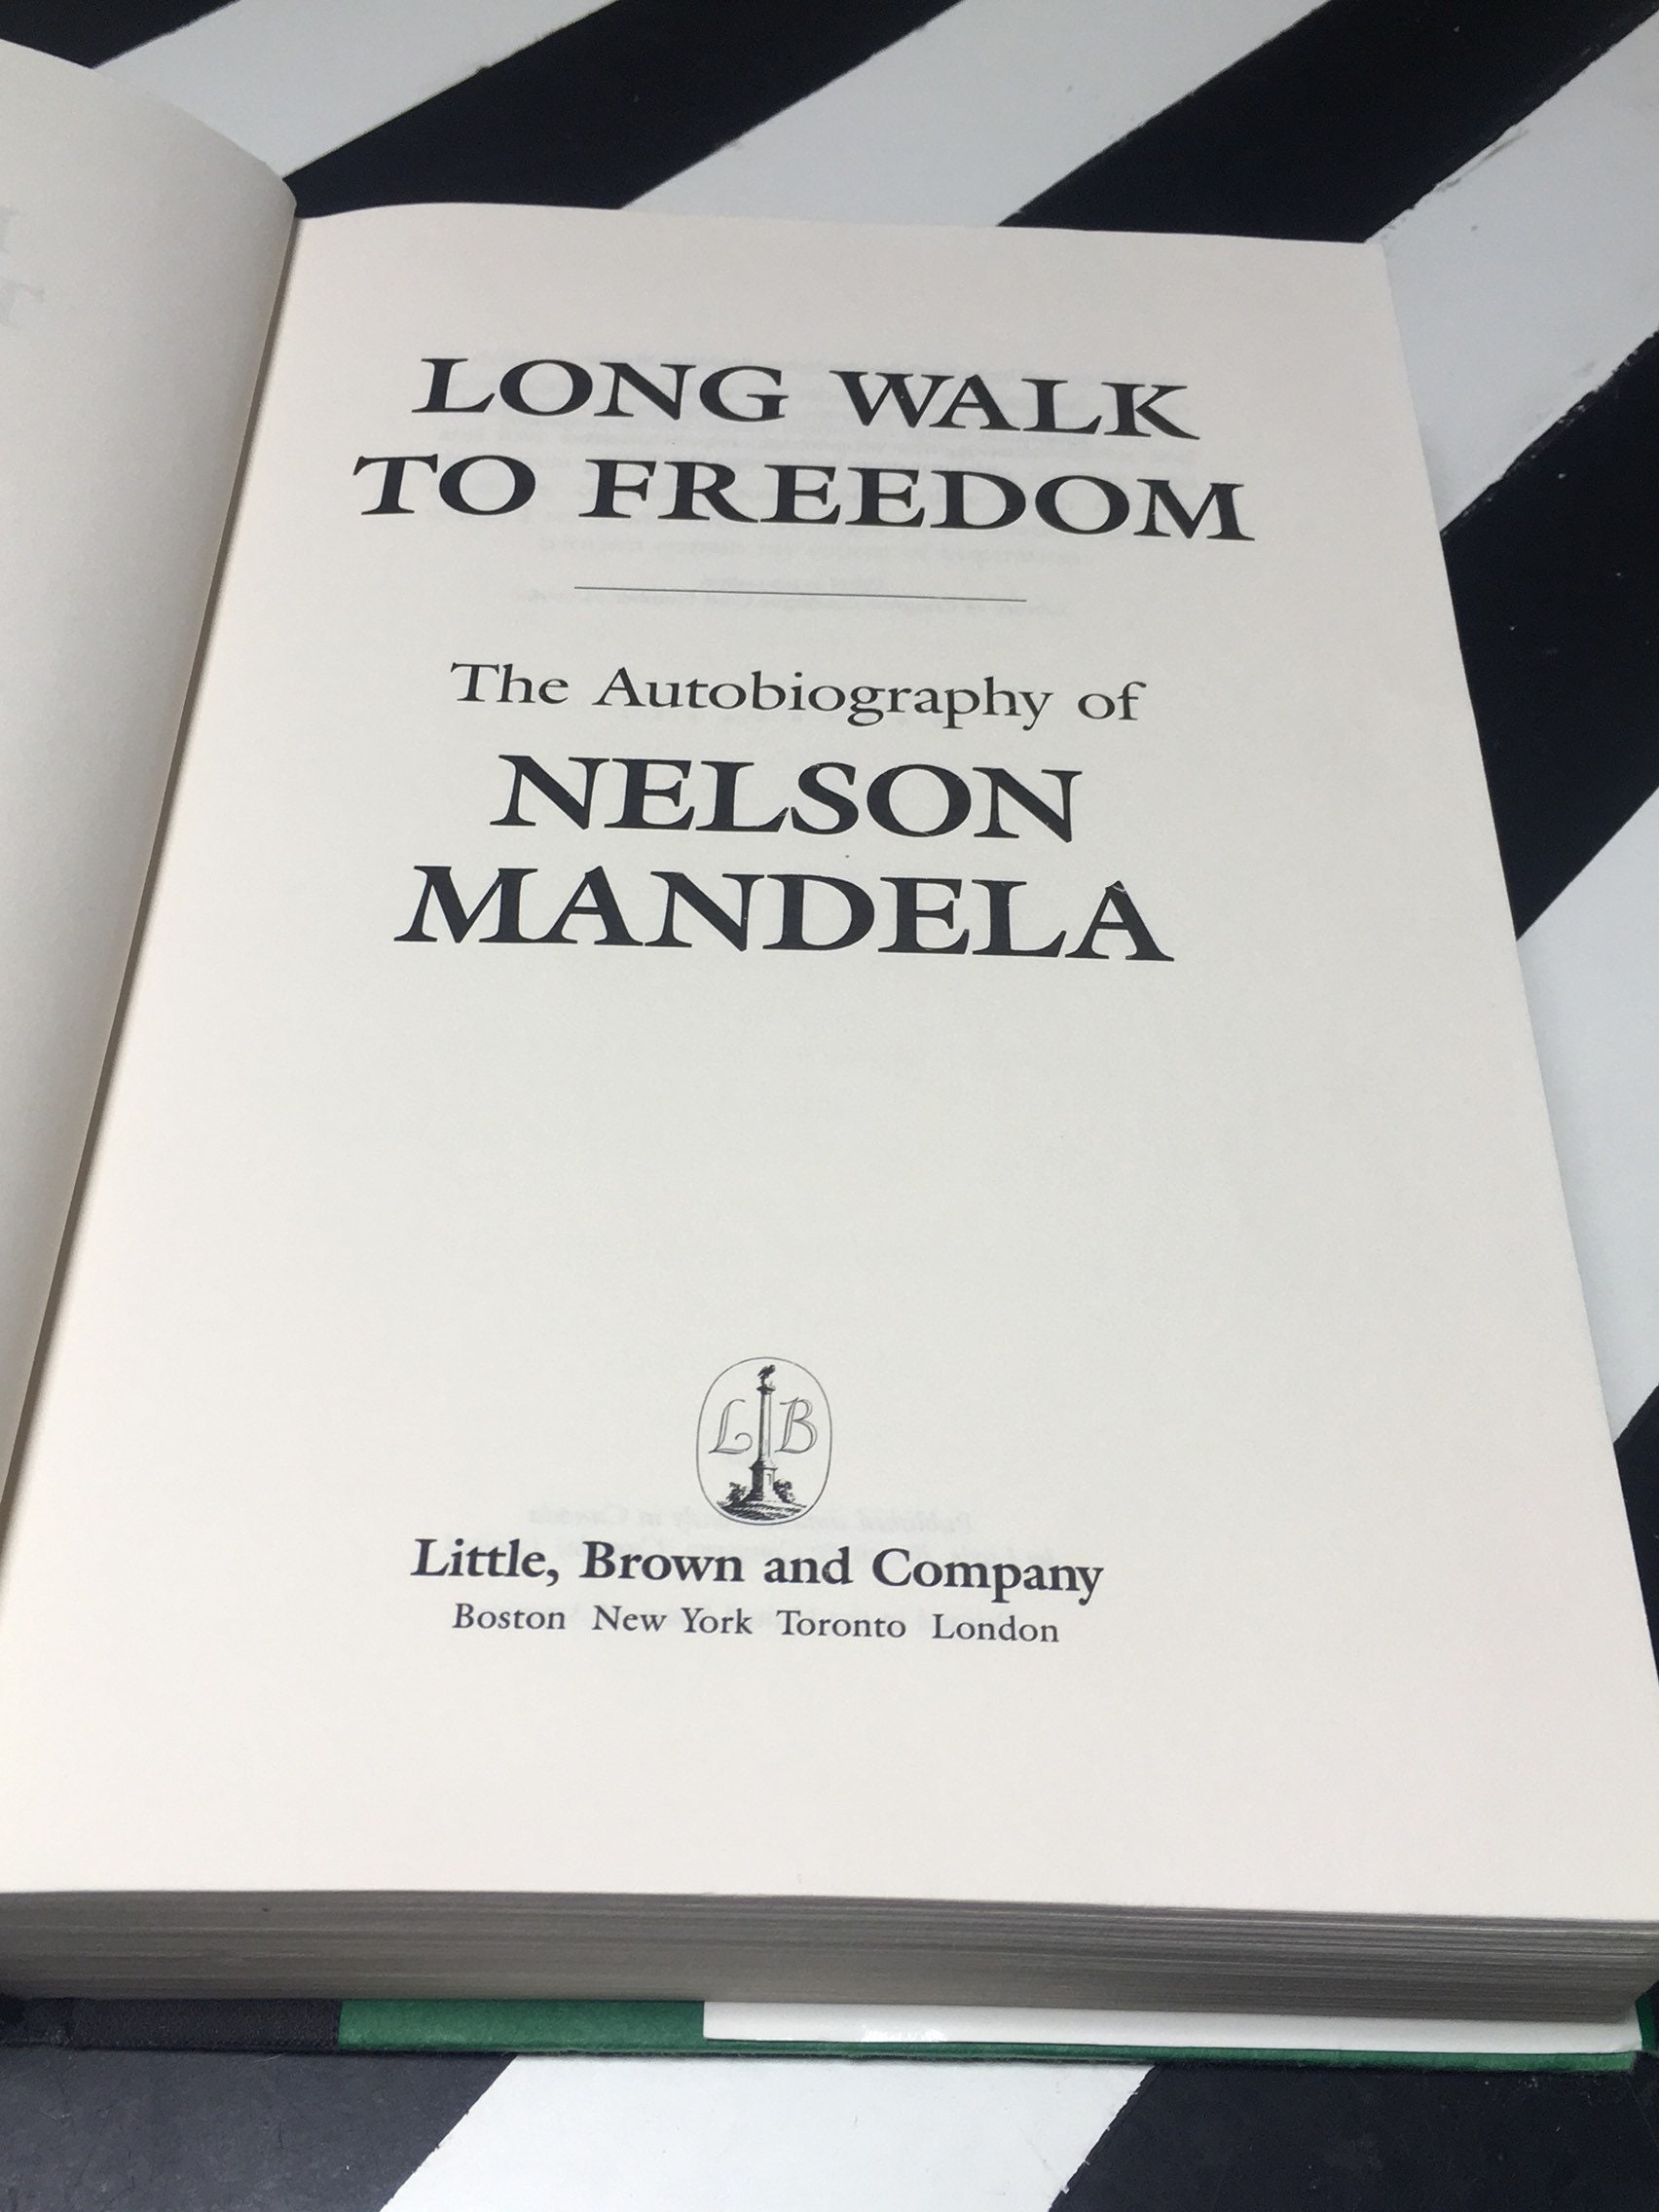 book review on long walk to freedom